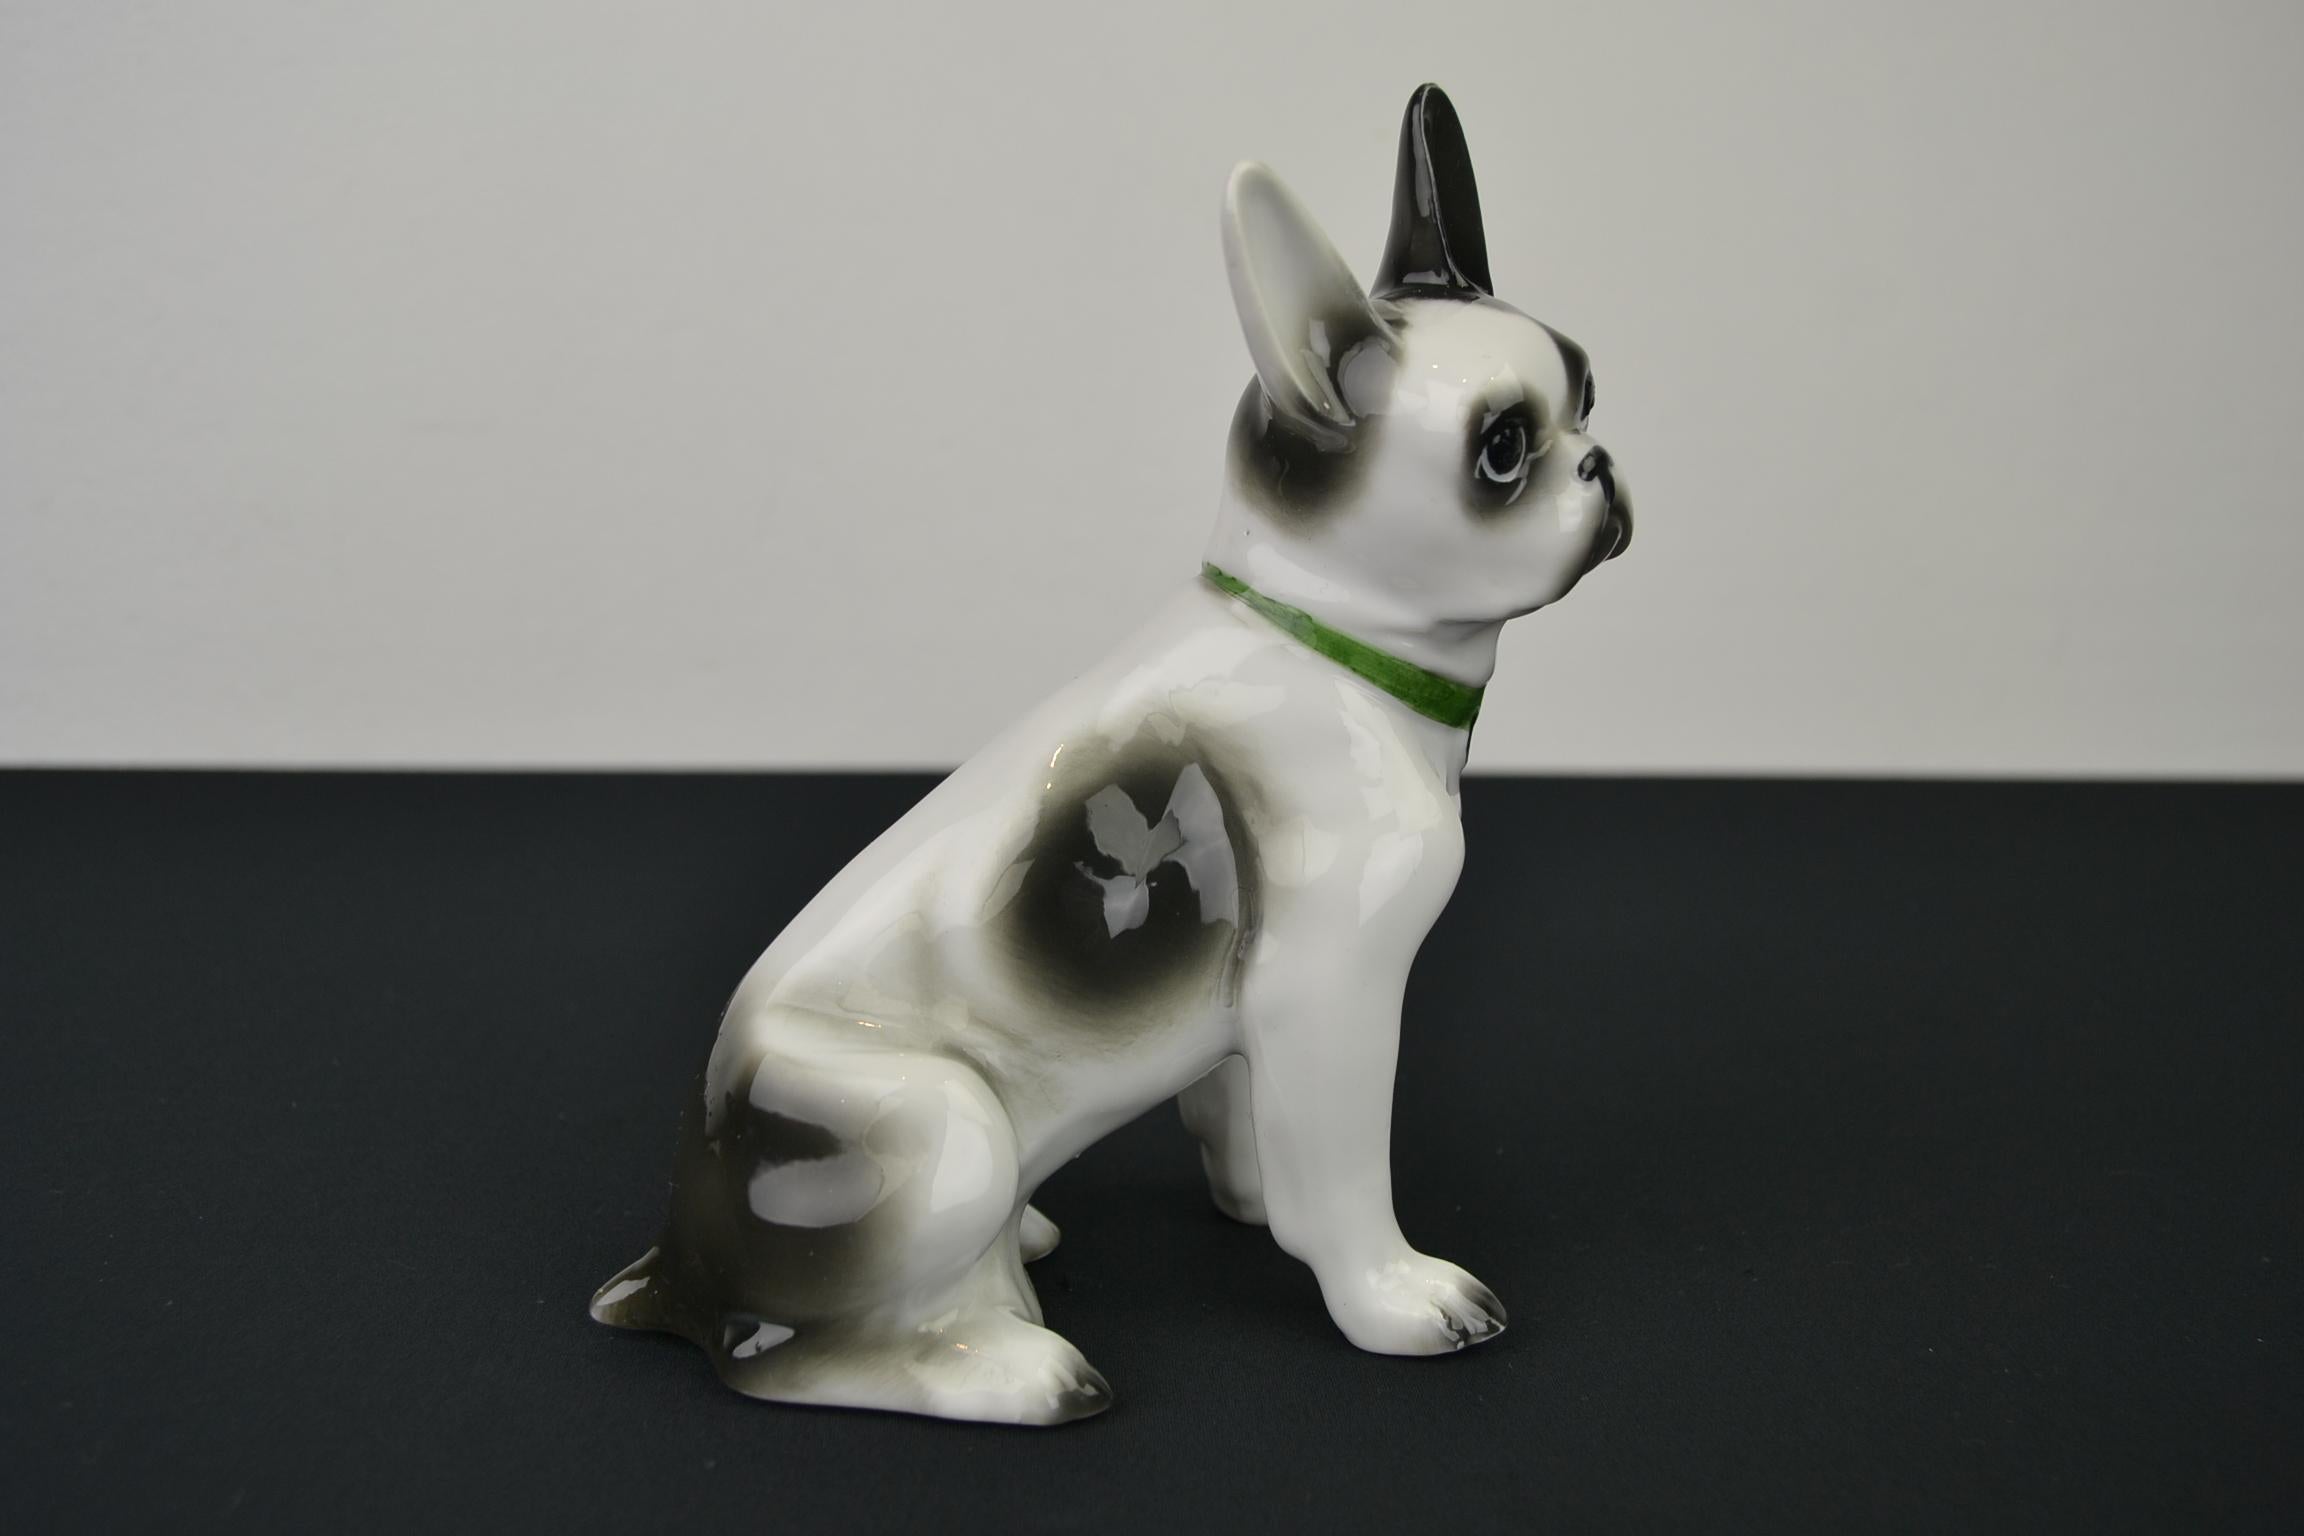 20th Century Porcelain French Bulldog, Boston Terrier Sculpture with Green Collar